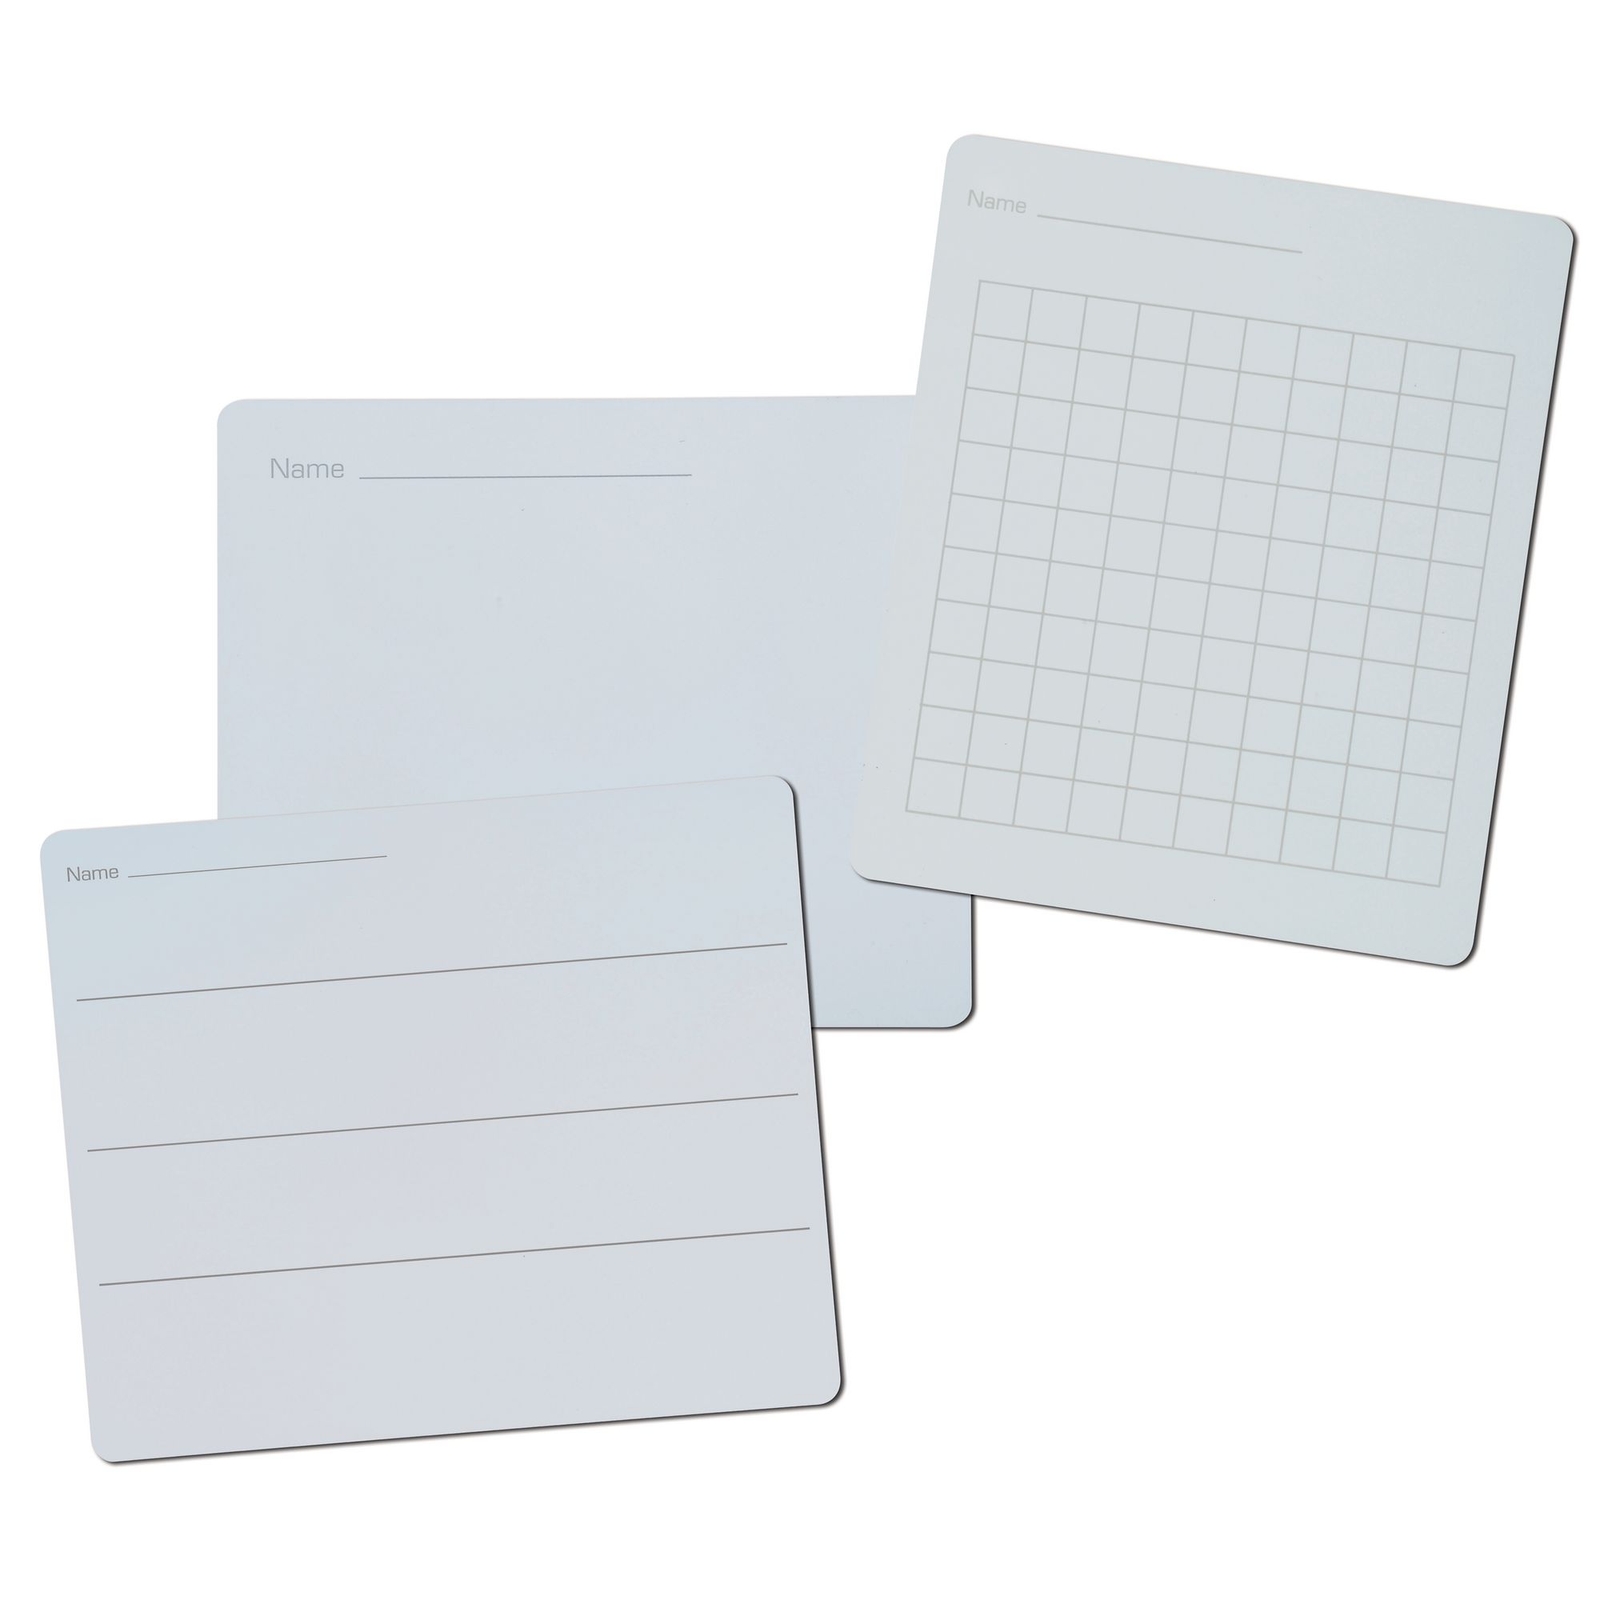 Classmates Lightweight Whiteboards - Non-magnetic - A4 Gridded - Pack 10